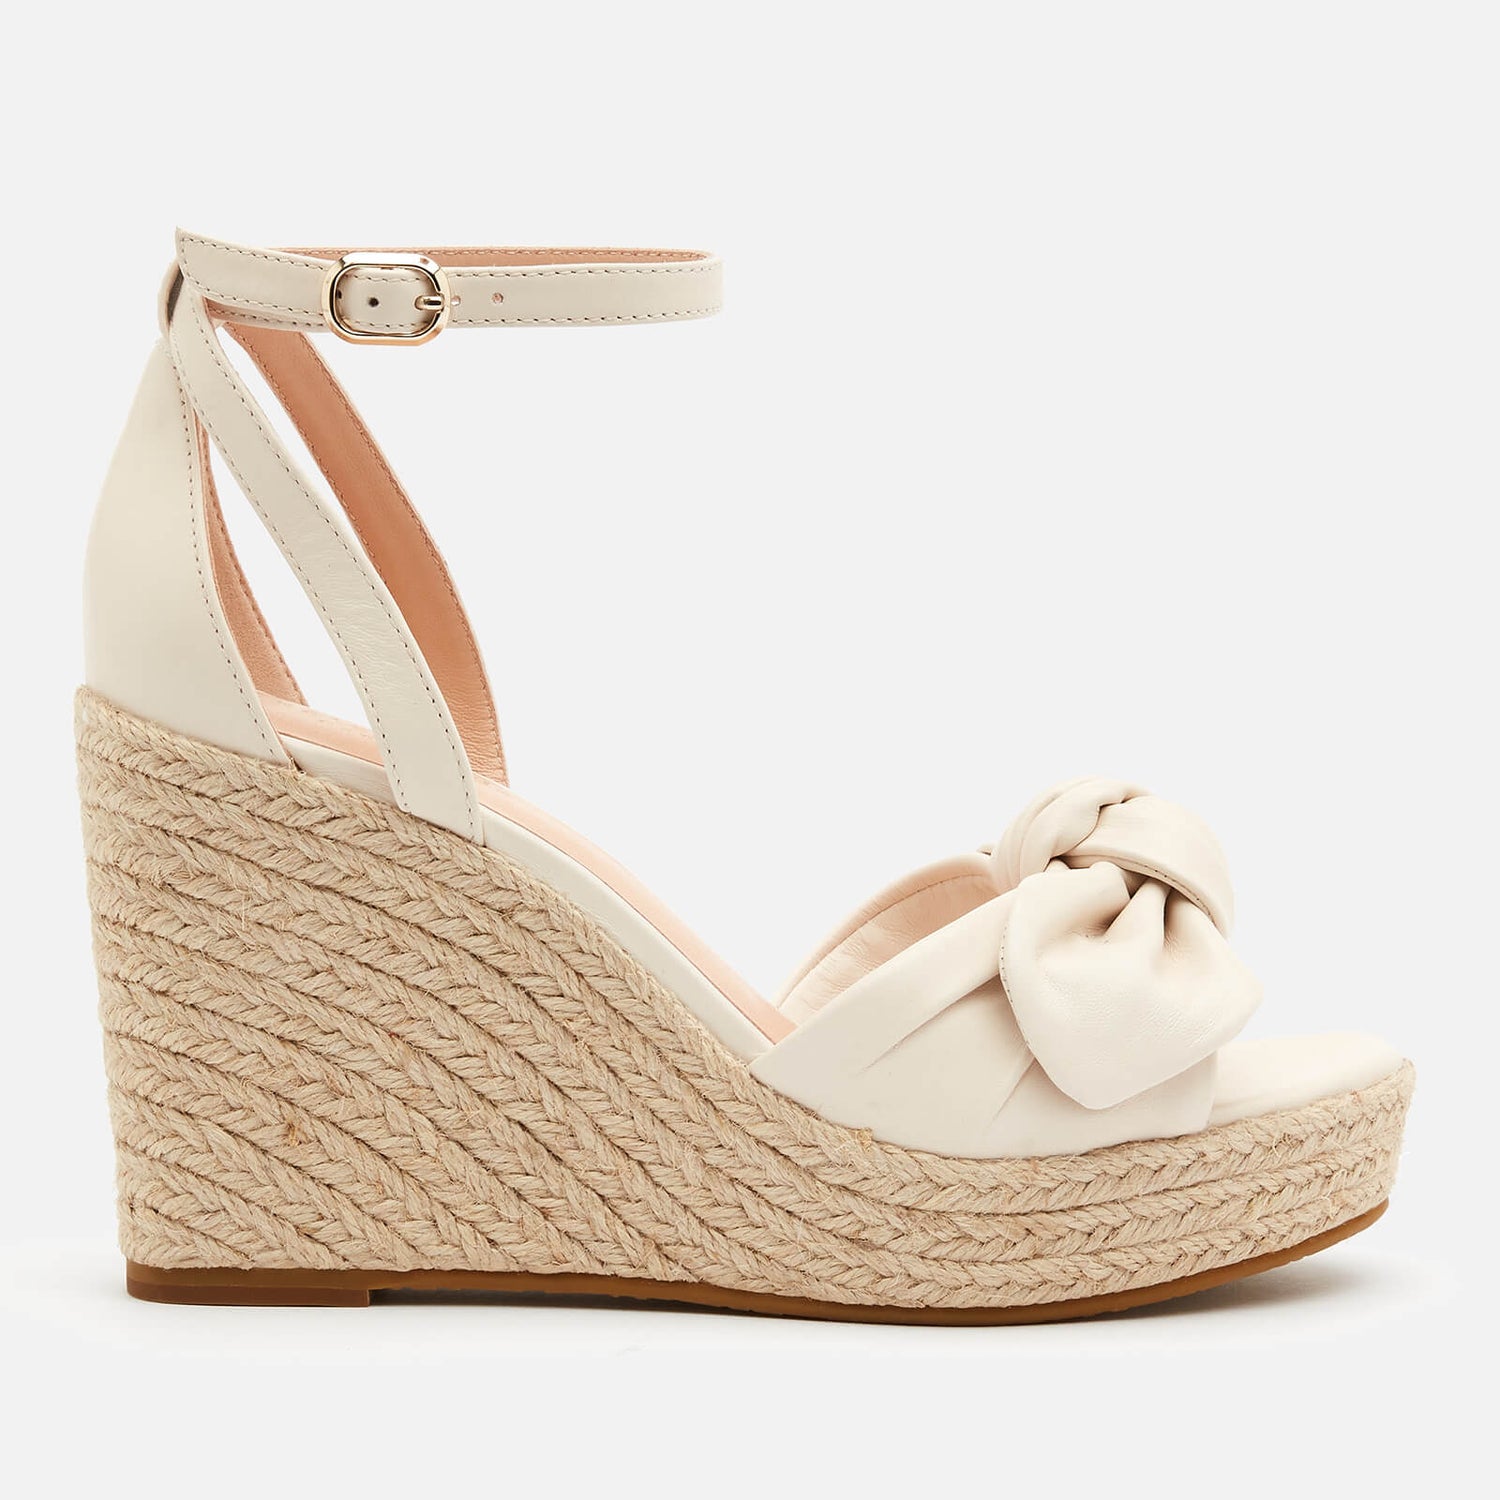 Kate Spade New York Women's Tianna Leather Wedged Sandals - Parchment